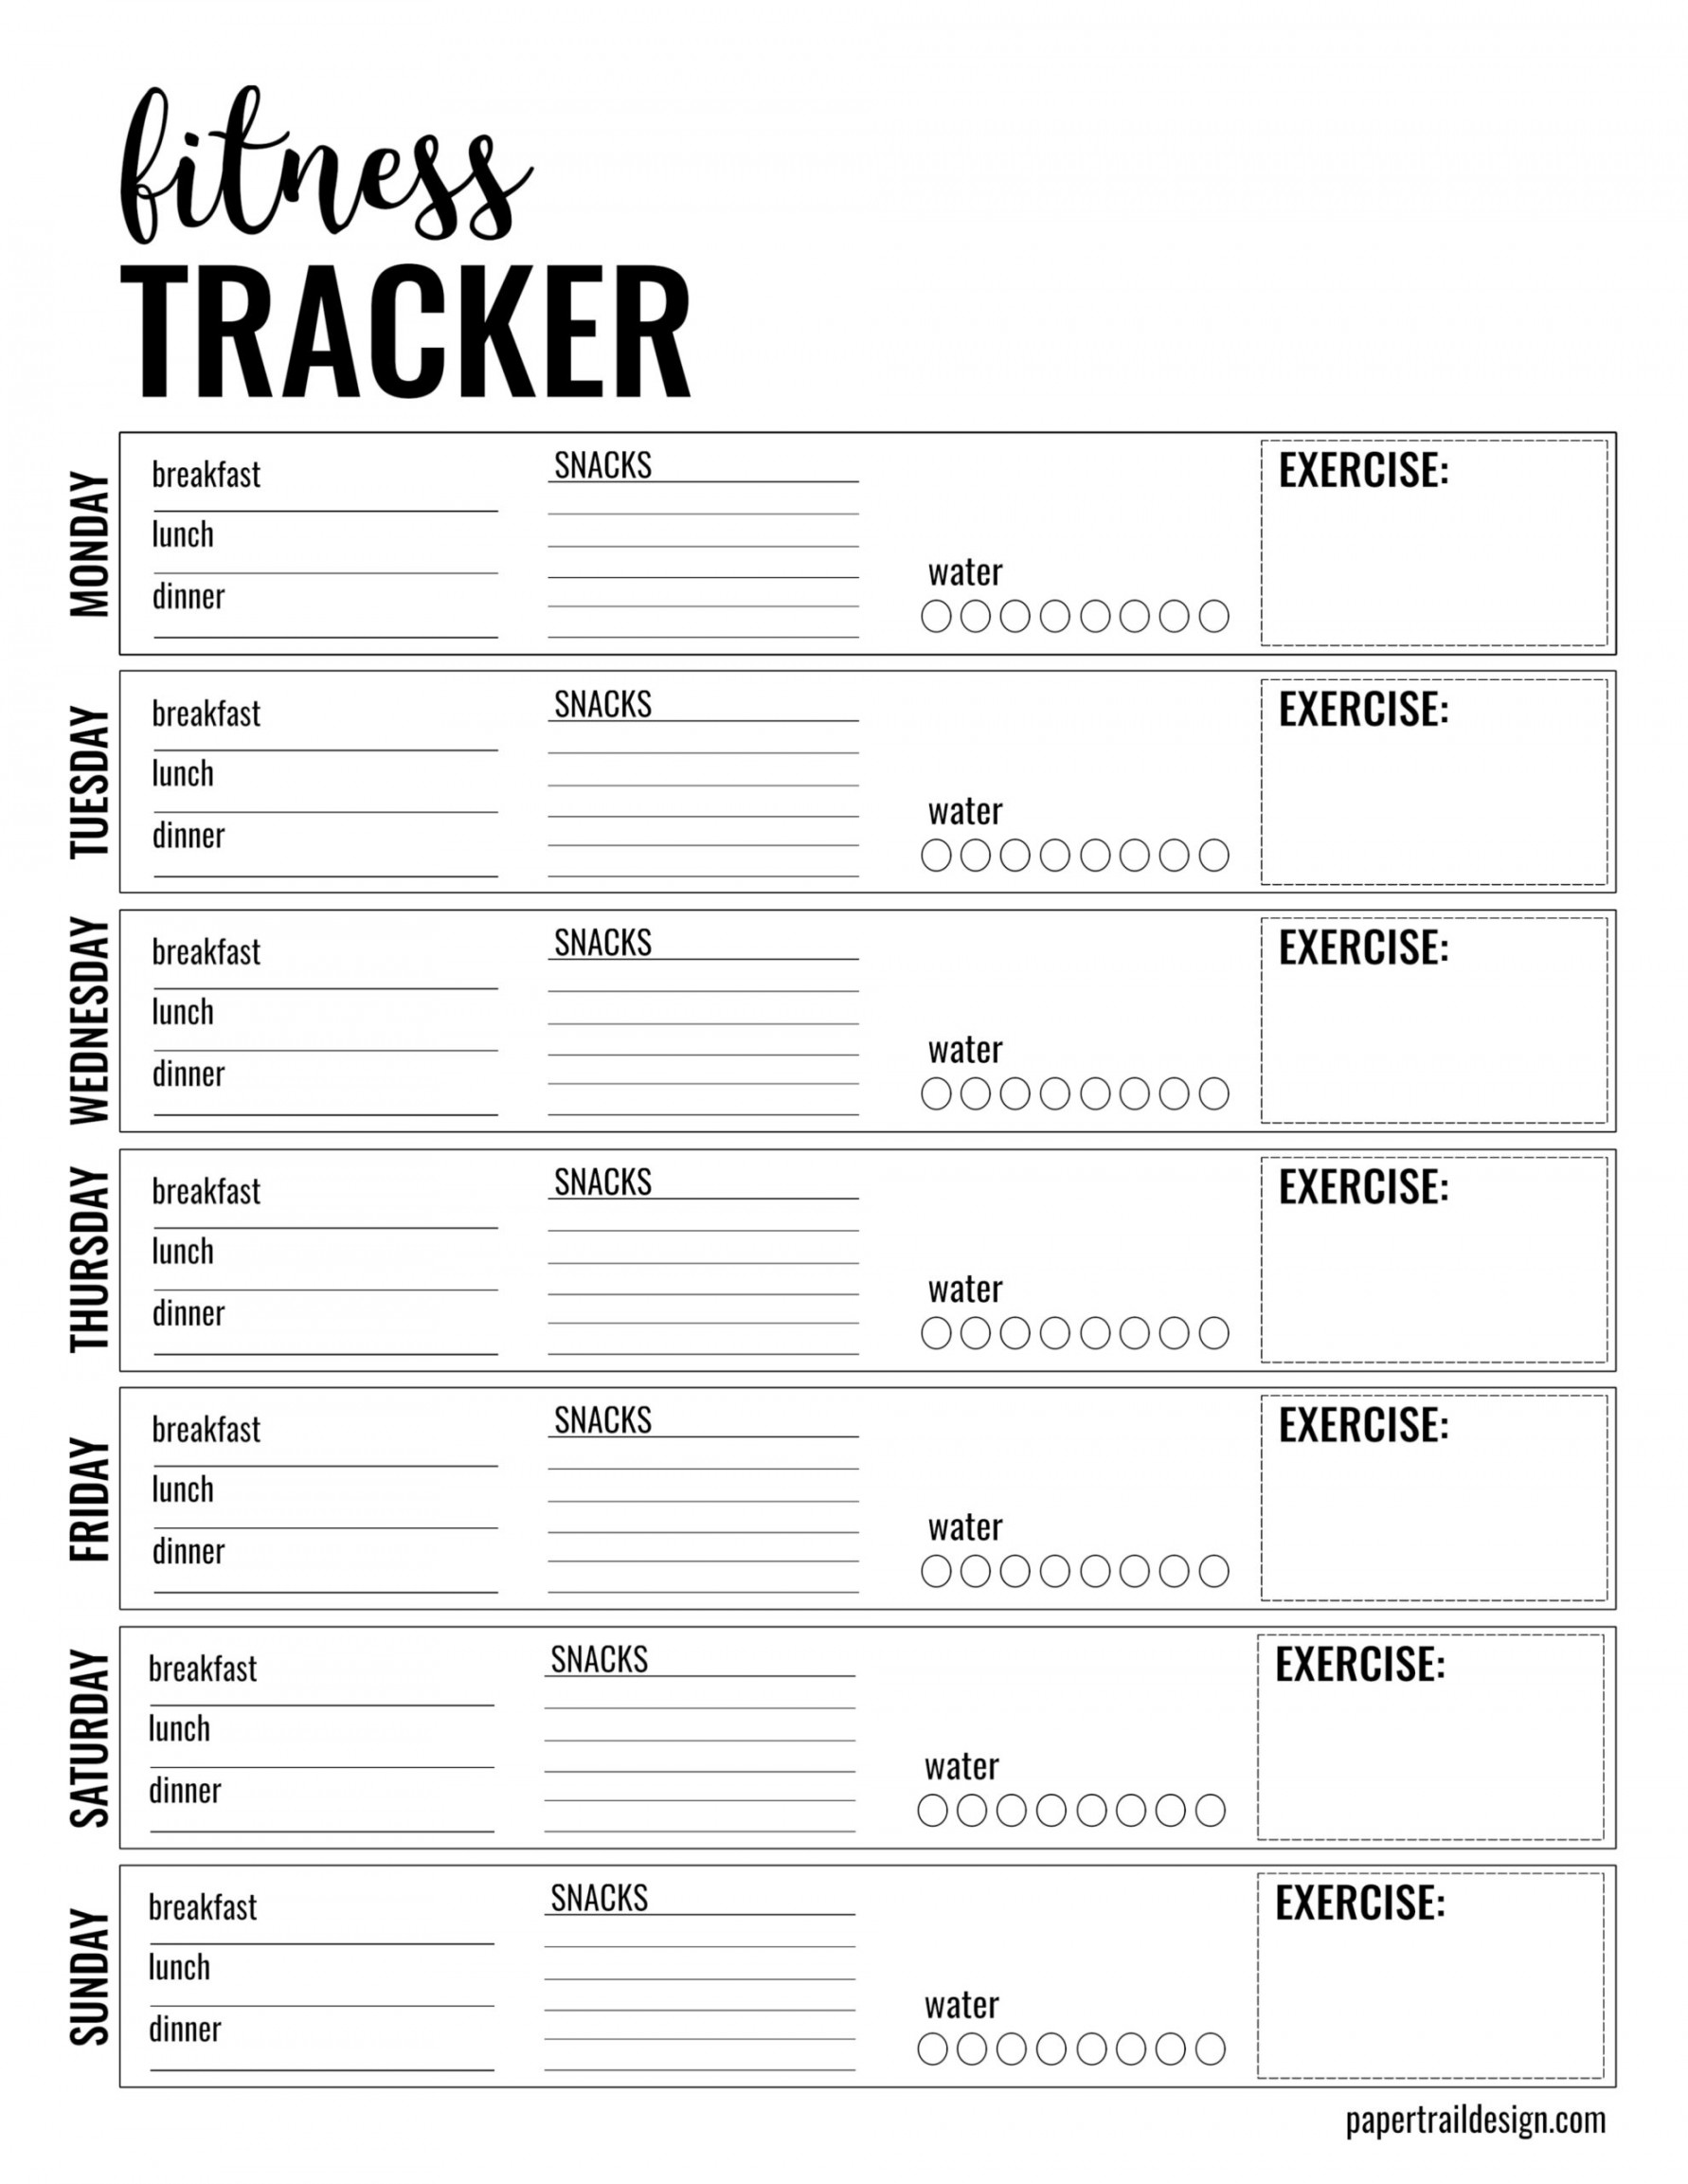 Health & Fitness Tracker Free Printable Planner Page - Paper Trail